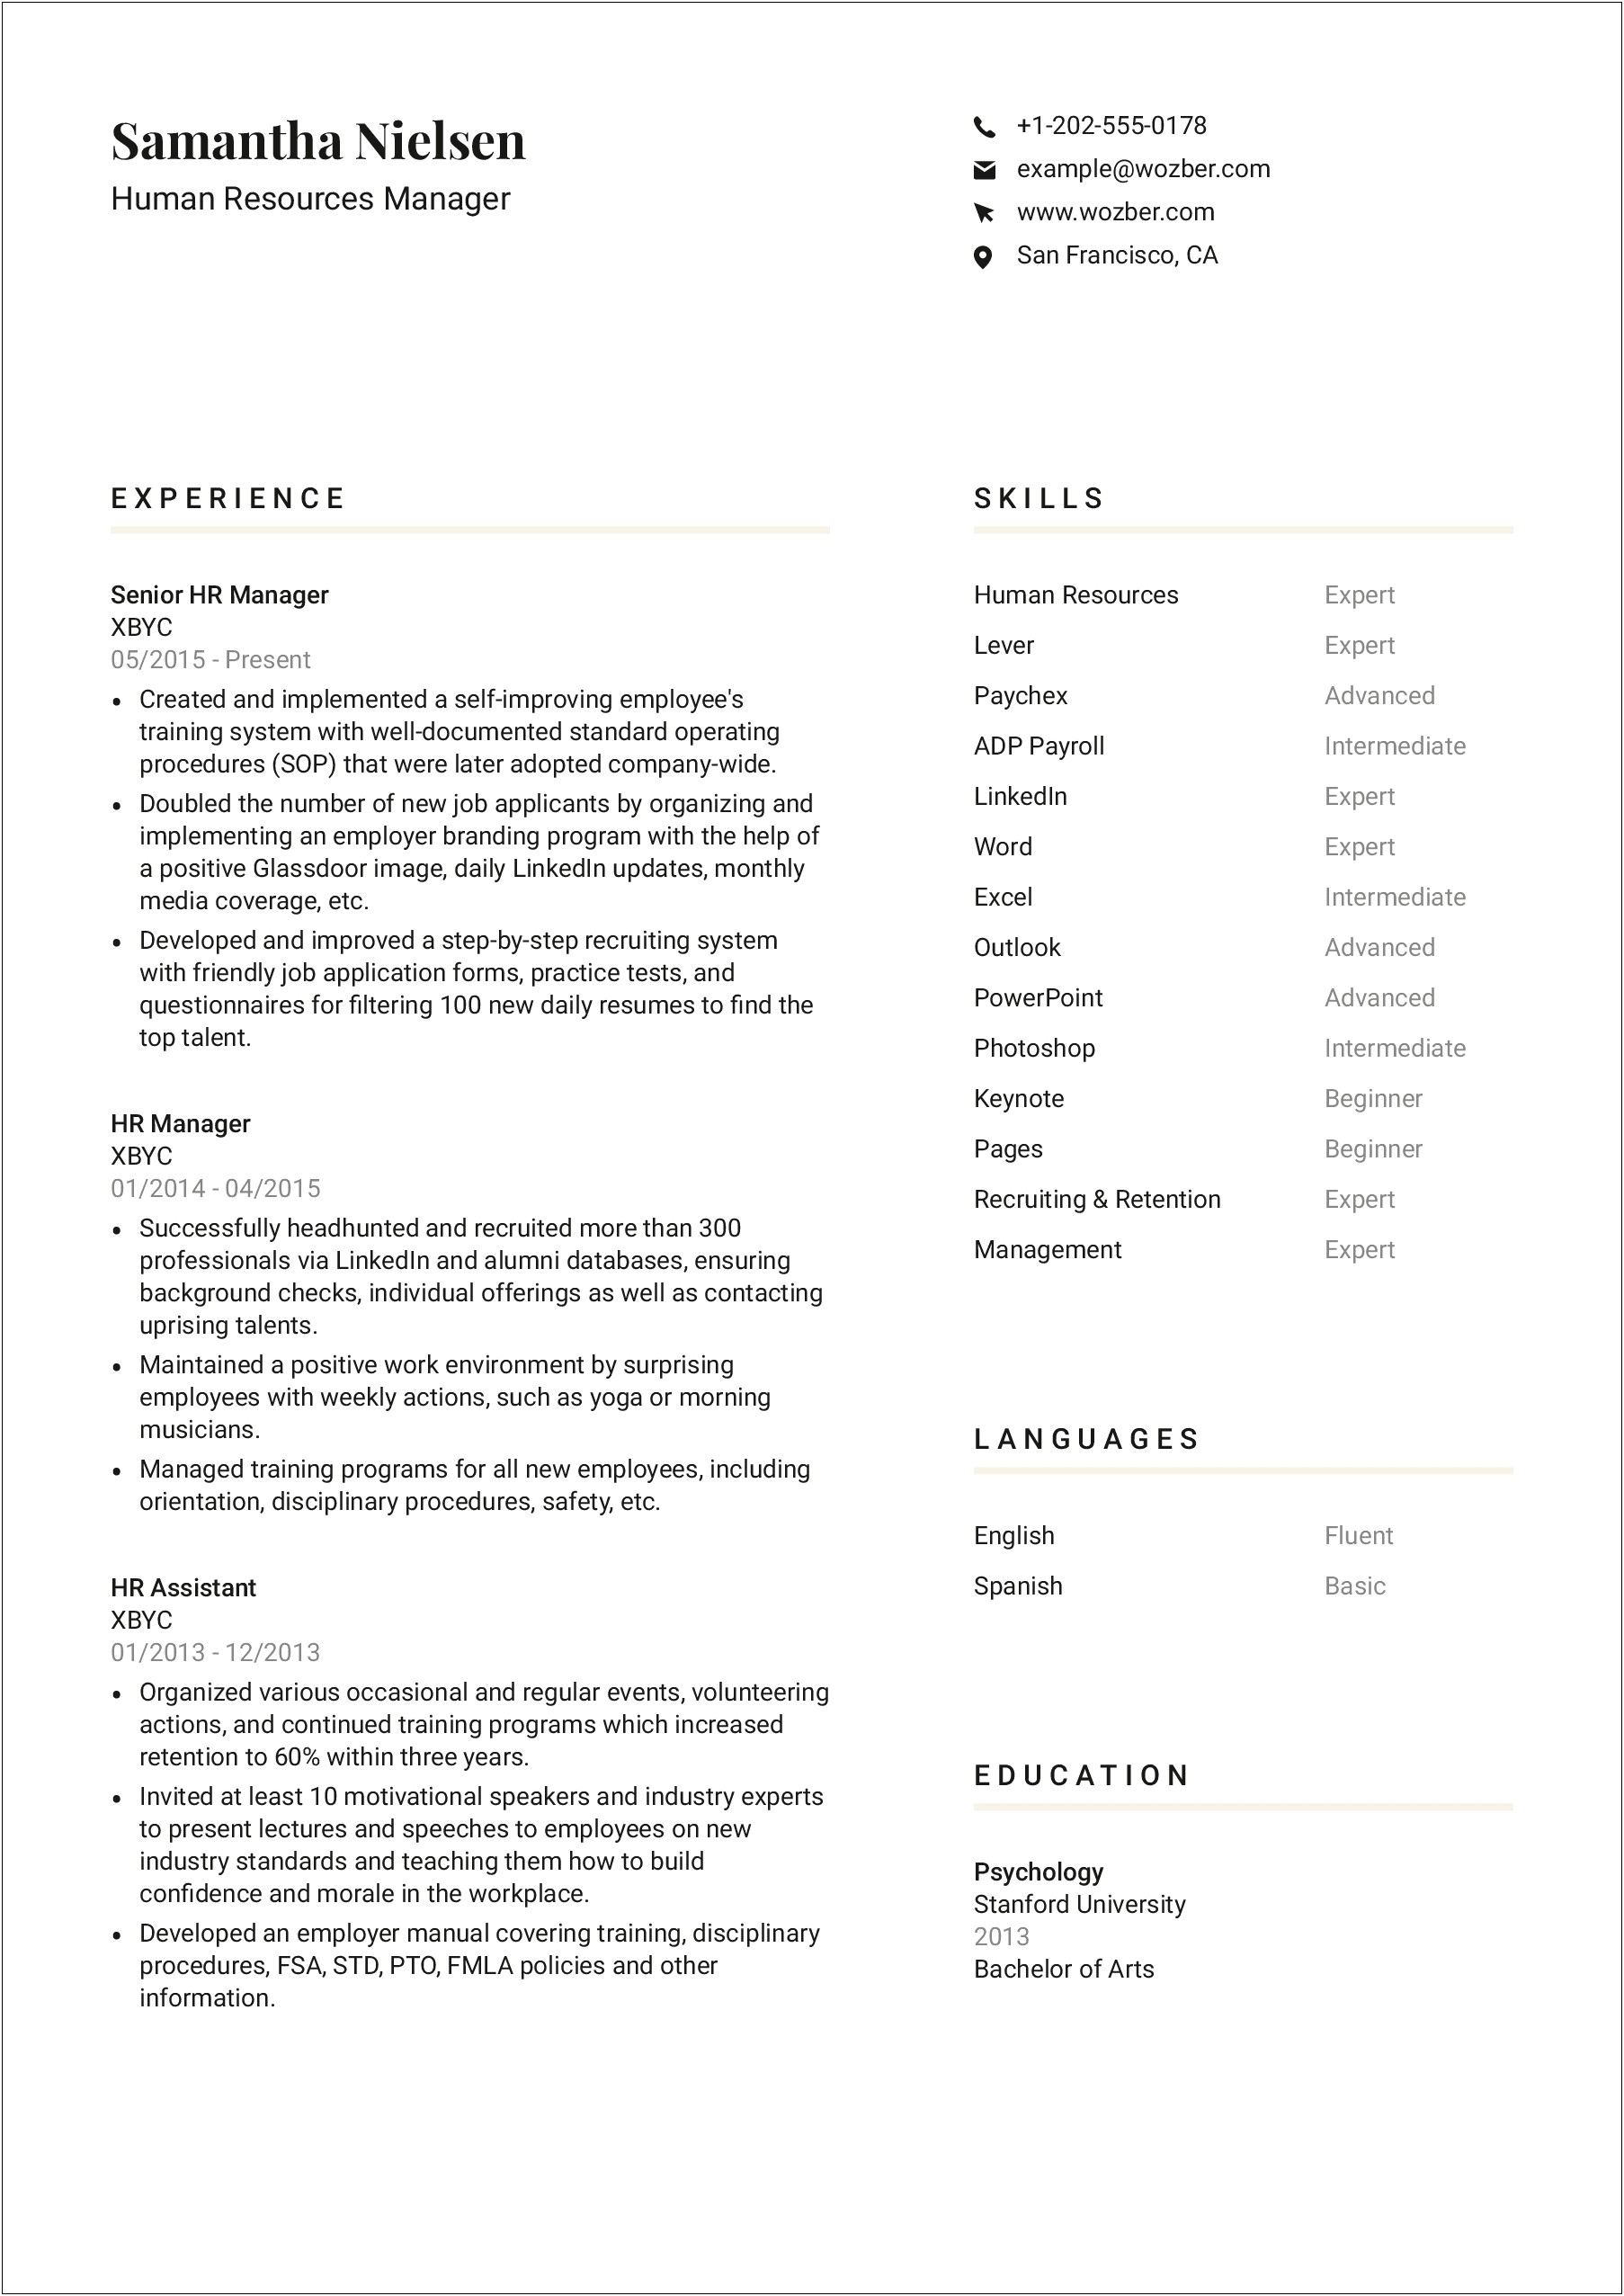 Human Resource Manager Resume Bullets